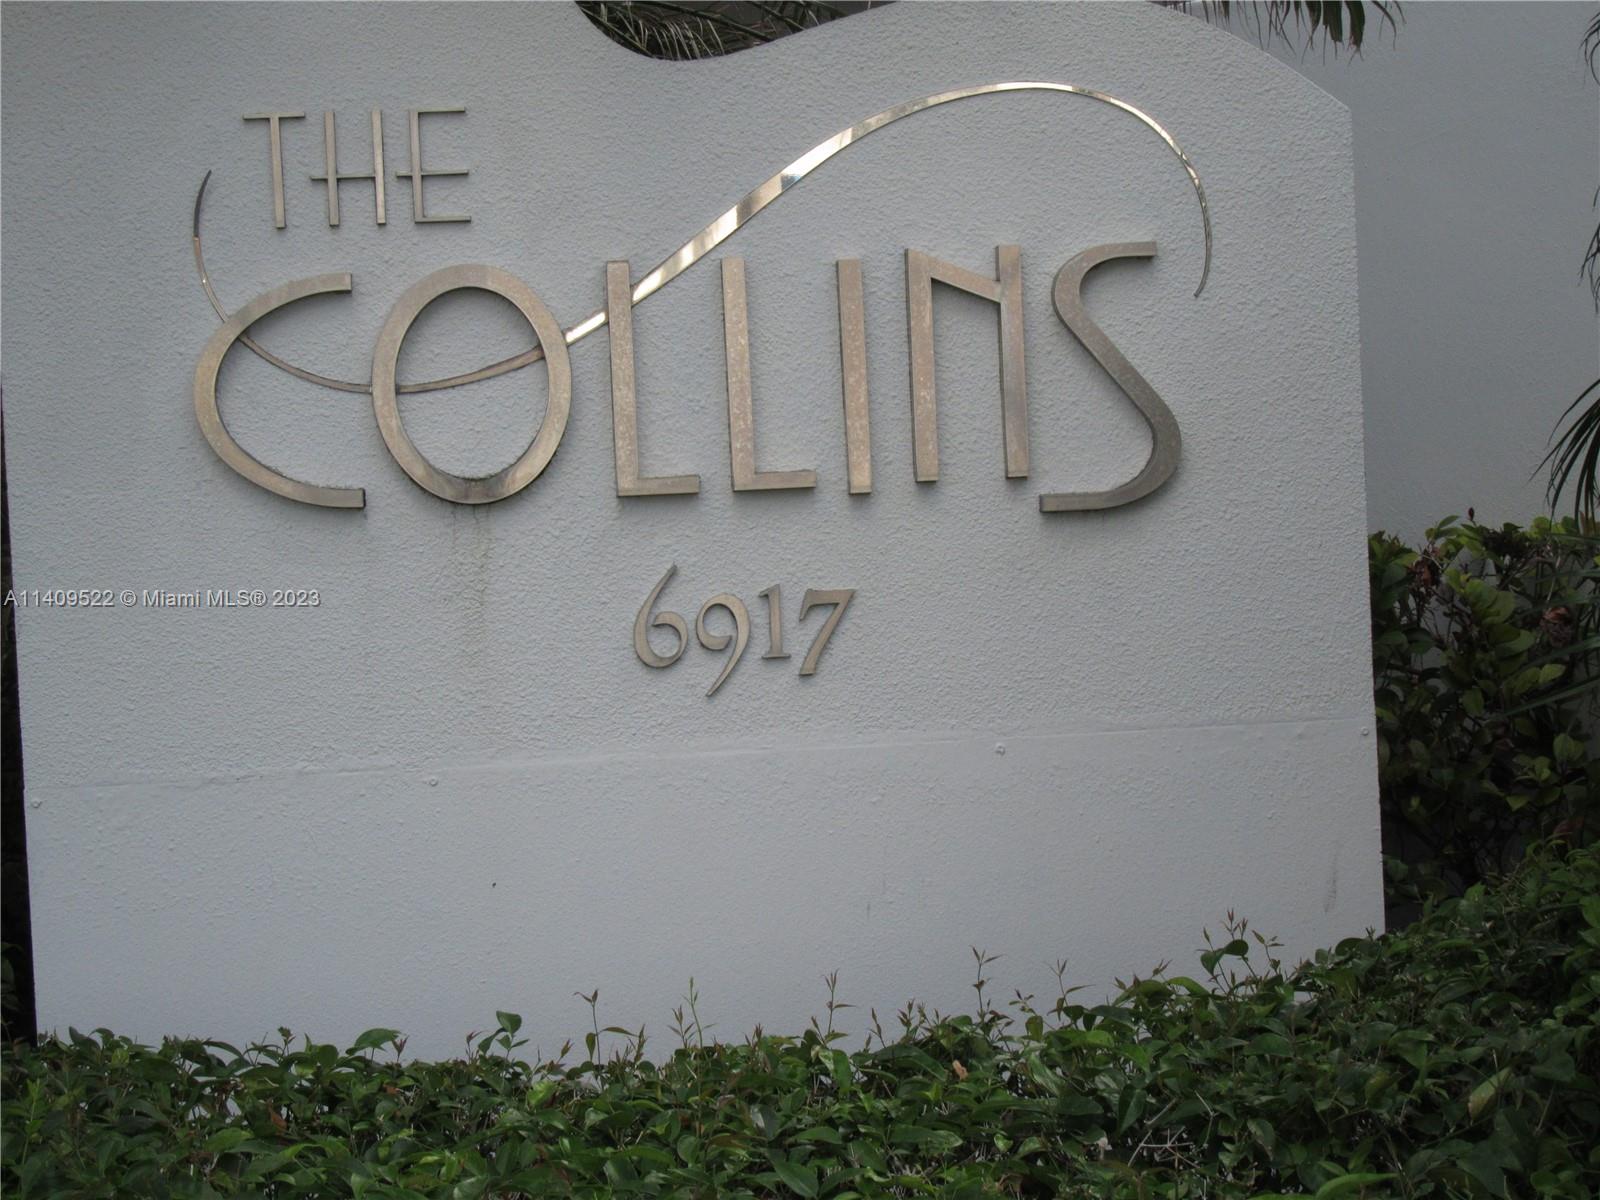 The Collins image #30